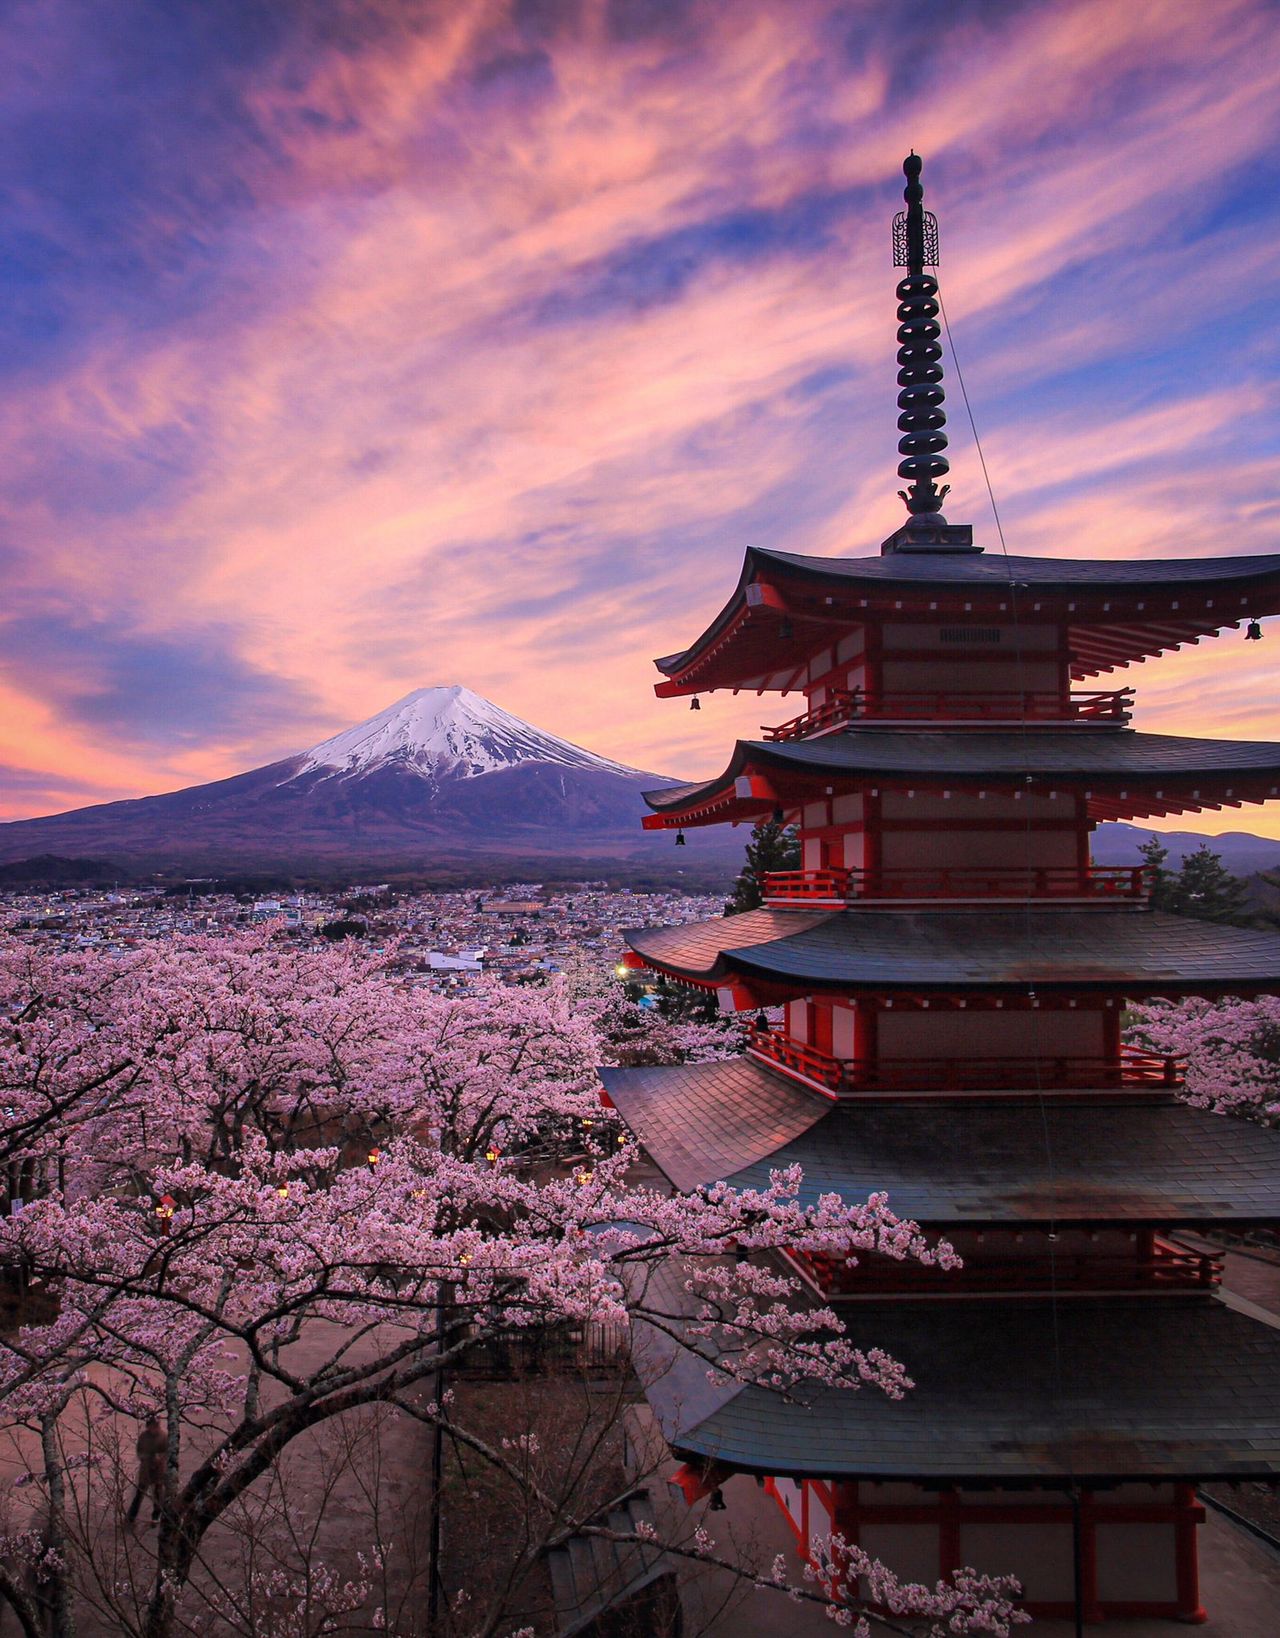 One of the most iconic angles of Fuji, cherry blossoms, and a five-story pagoda, viewed from Arakurayama Sengen Park, in the city of Fujiyoshida, Yamanashi Prefecture. Visitors flock here to get a perfect shot, but Hashimuki takes it to a different level entirely.